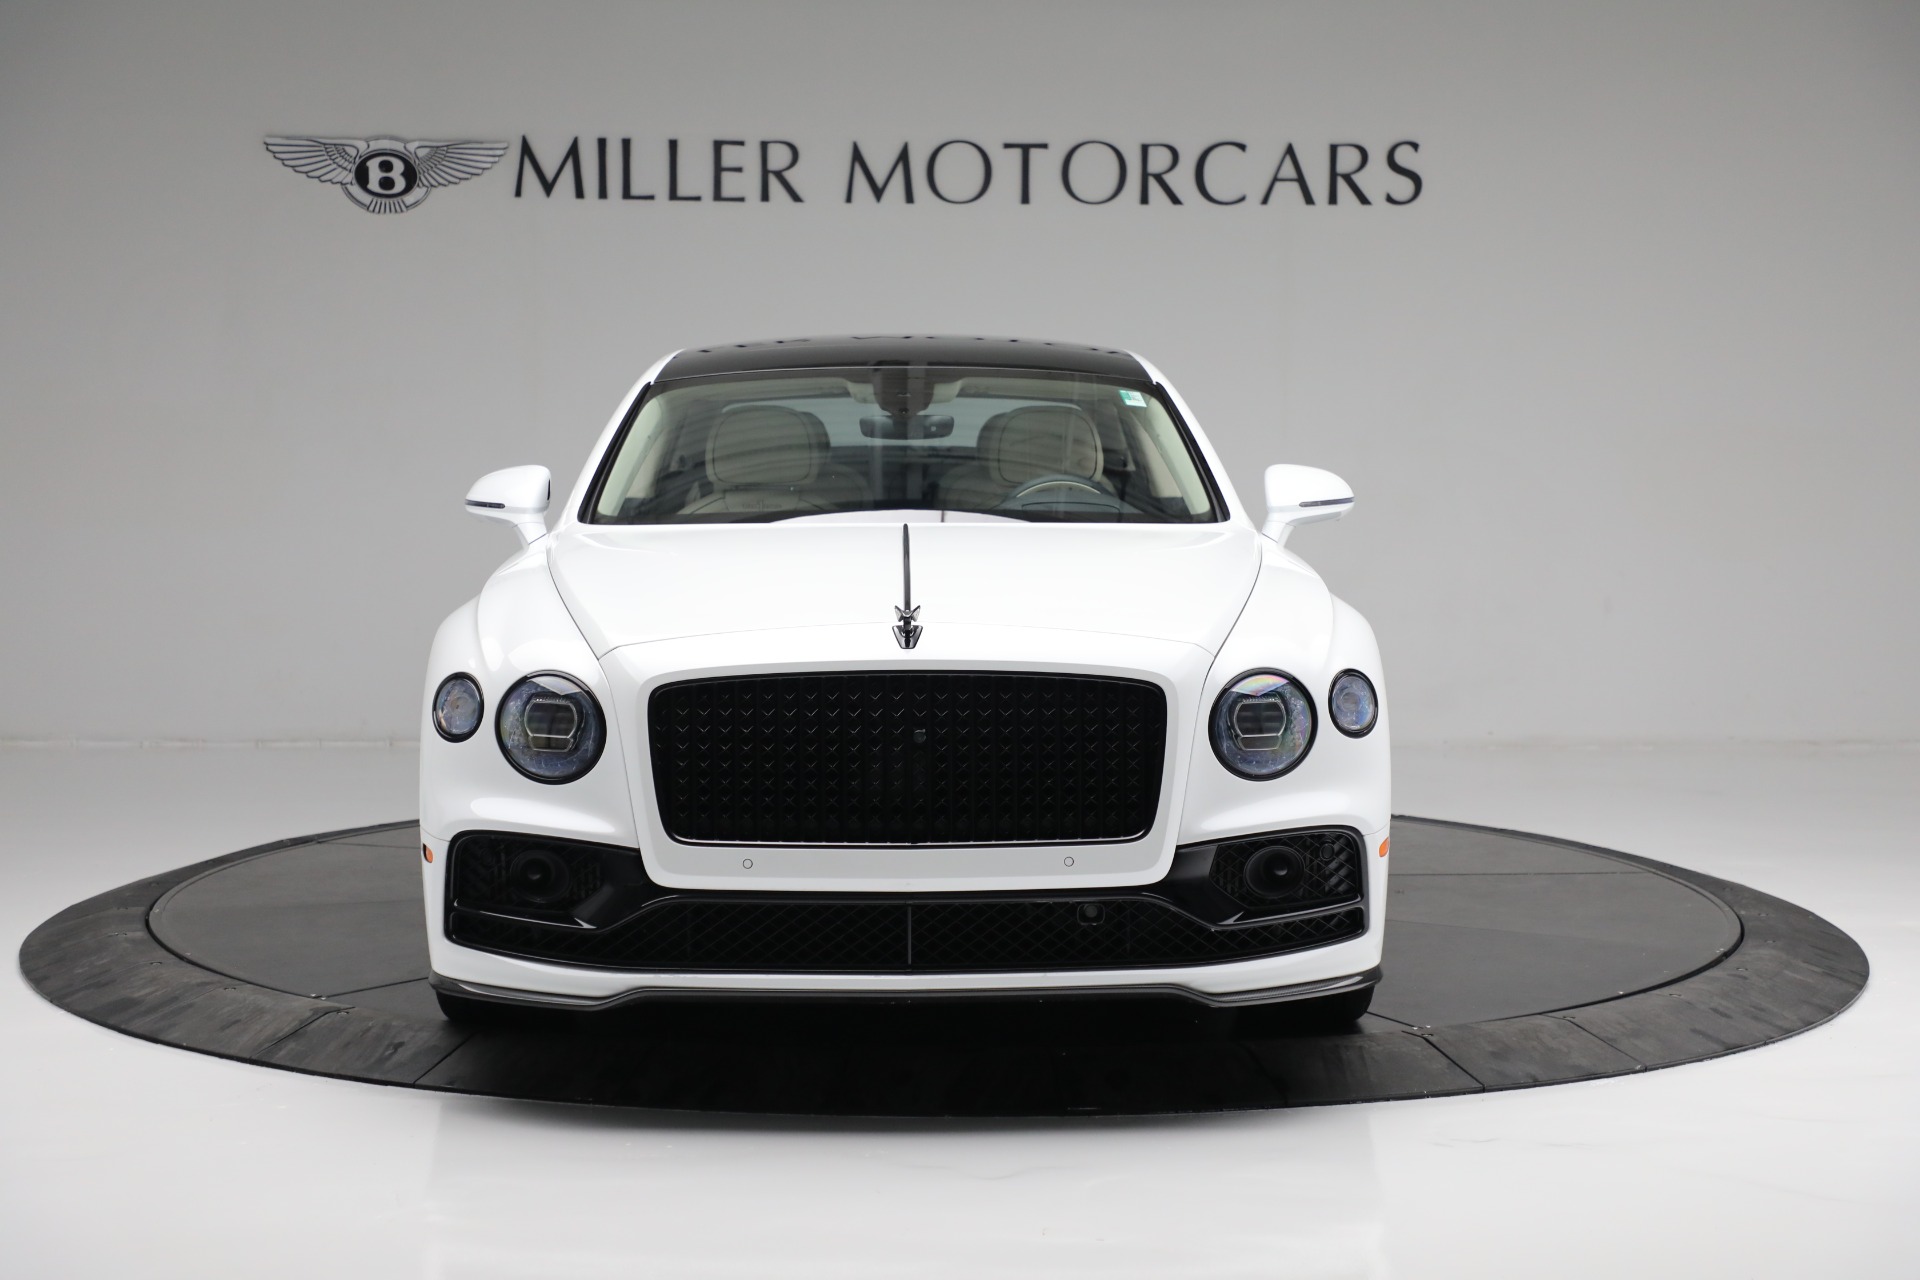 2021 BENTLEY FLYING SPUR W12 - 3,680 MILES for sale by auction in